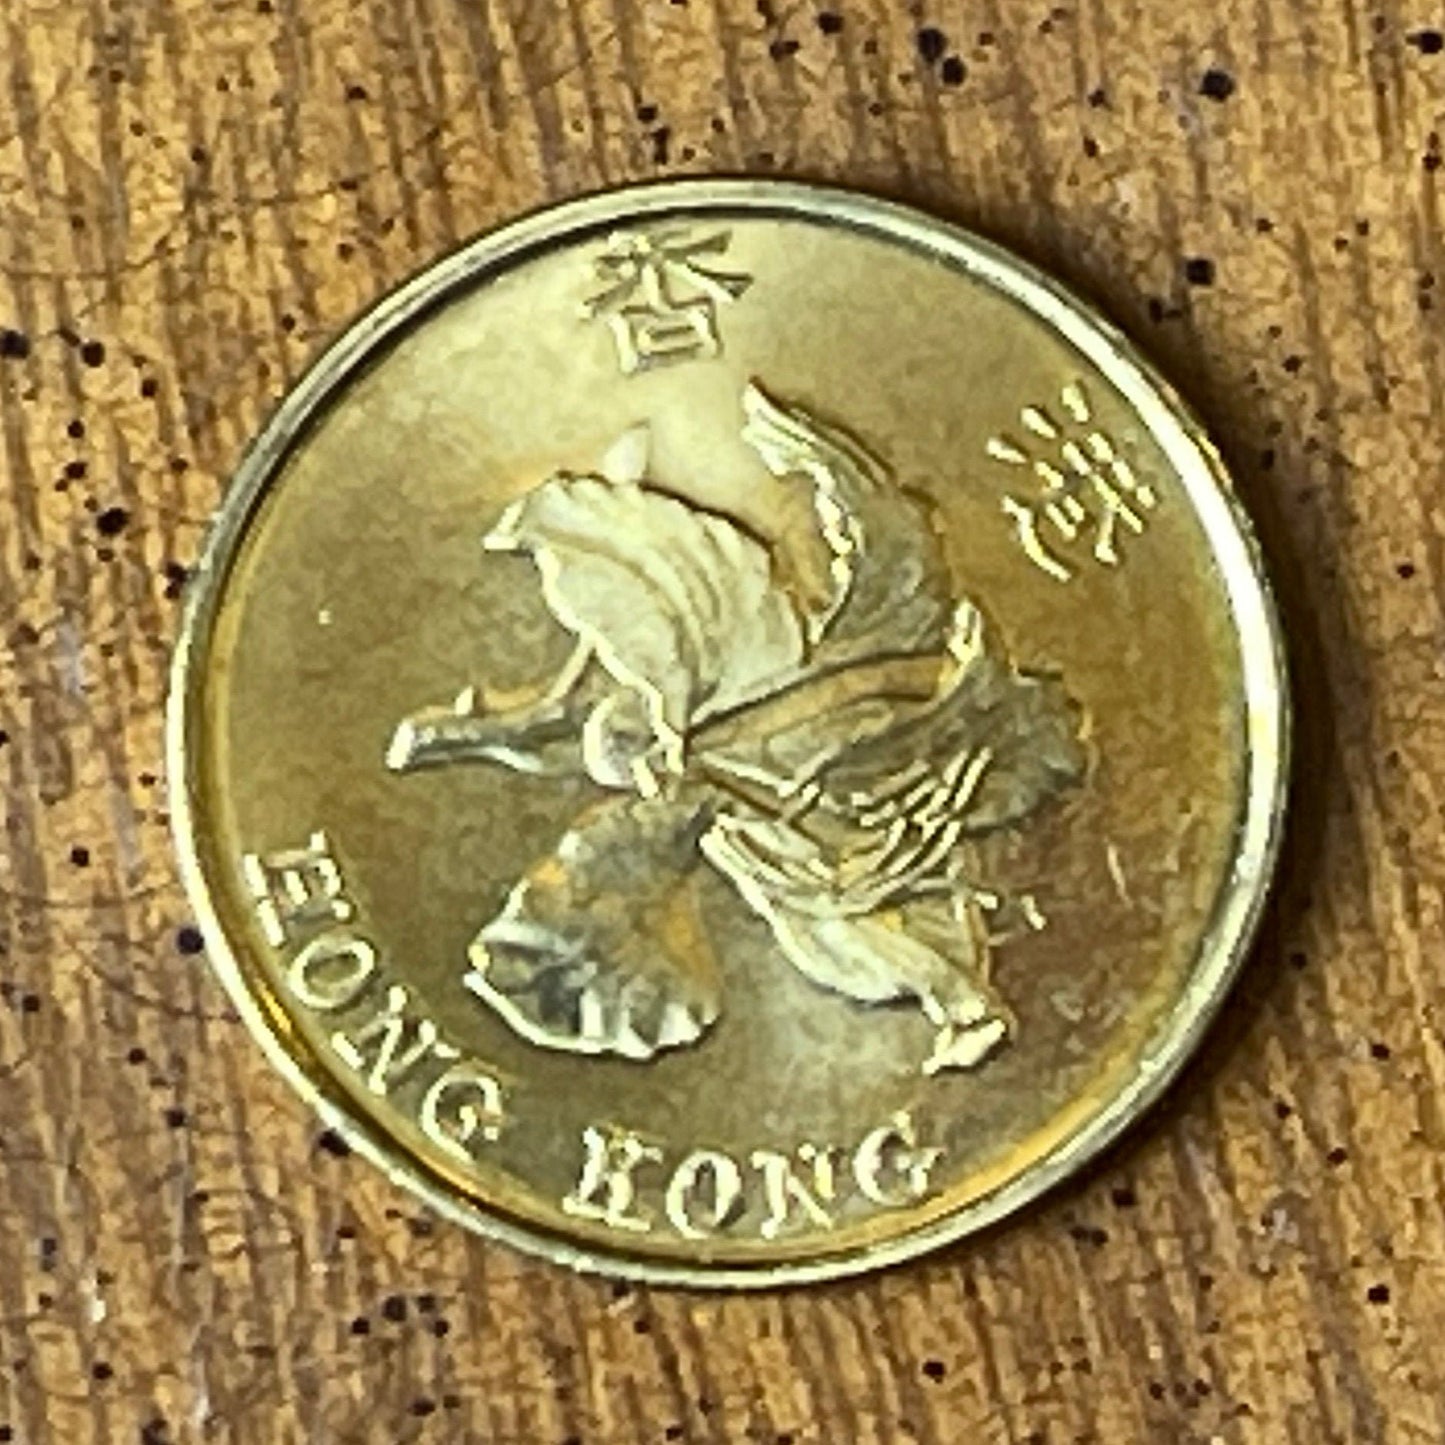 Bauhinia Orchid 10 Cent Hong Kong Authentic Coin Money for Jewelry and Craft Making